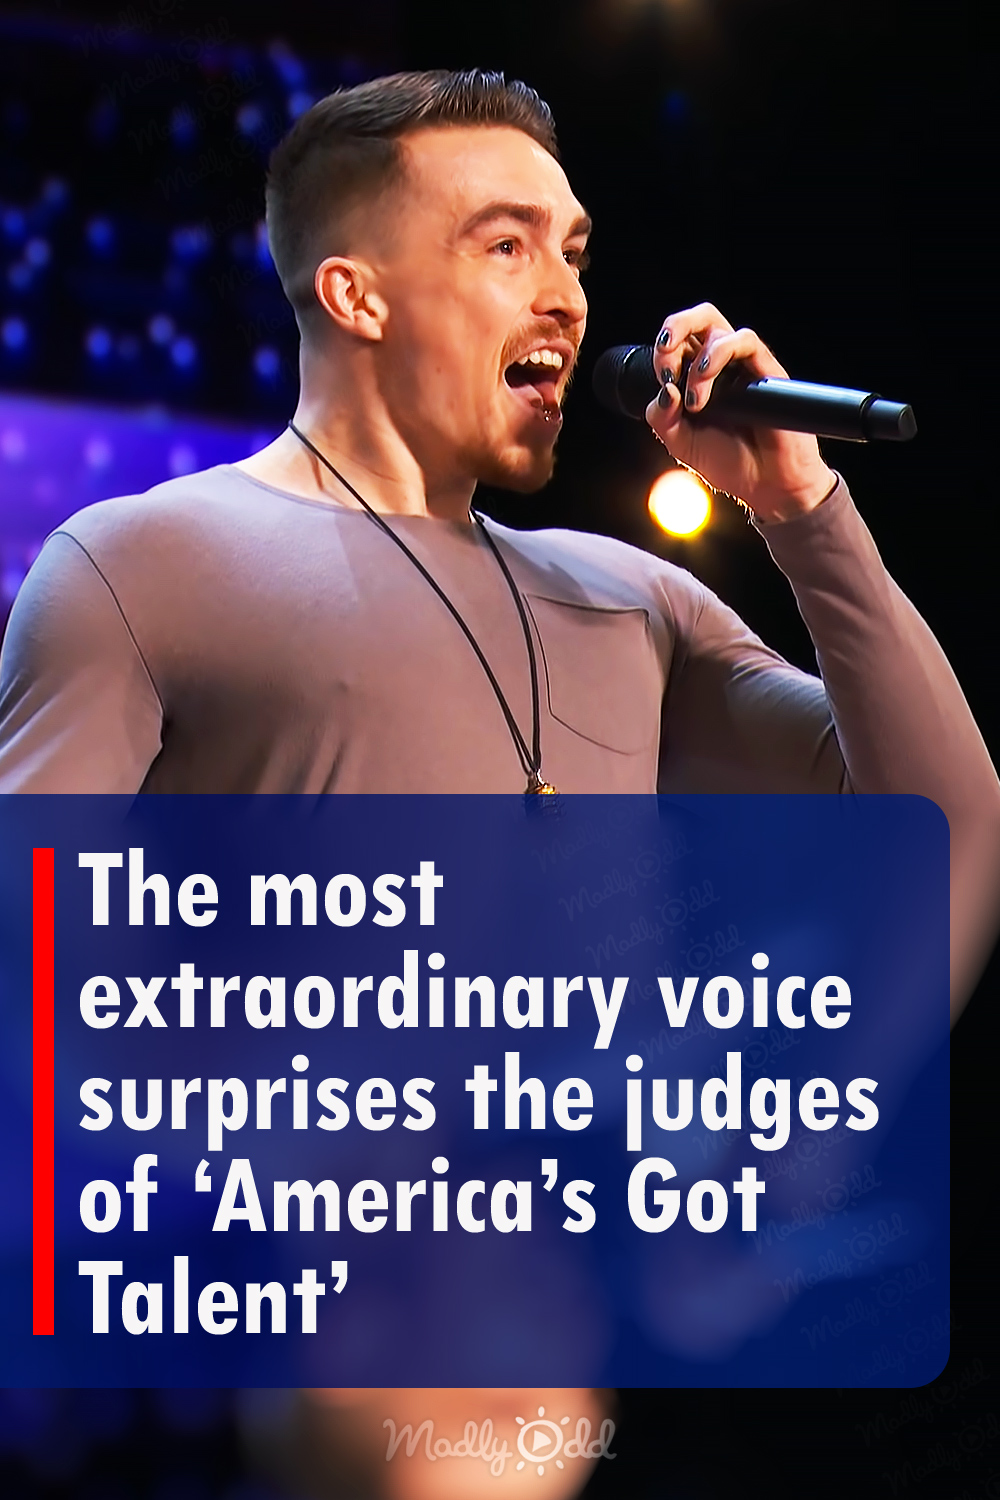 The most extraordinary voice surprises the judges of ‘America’s Got Talent’